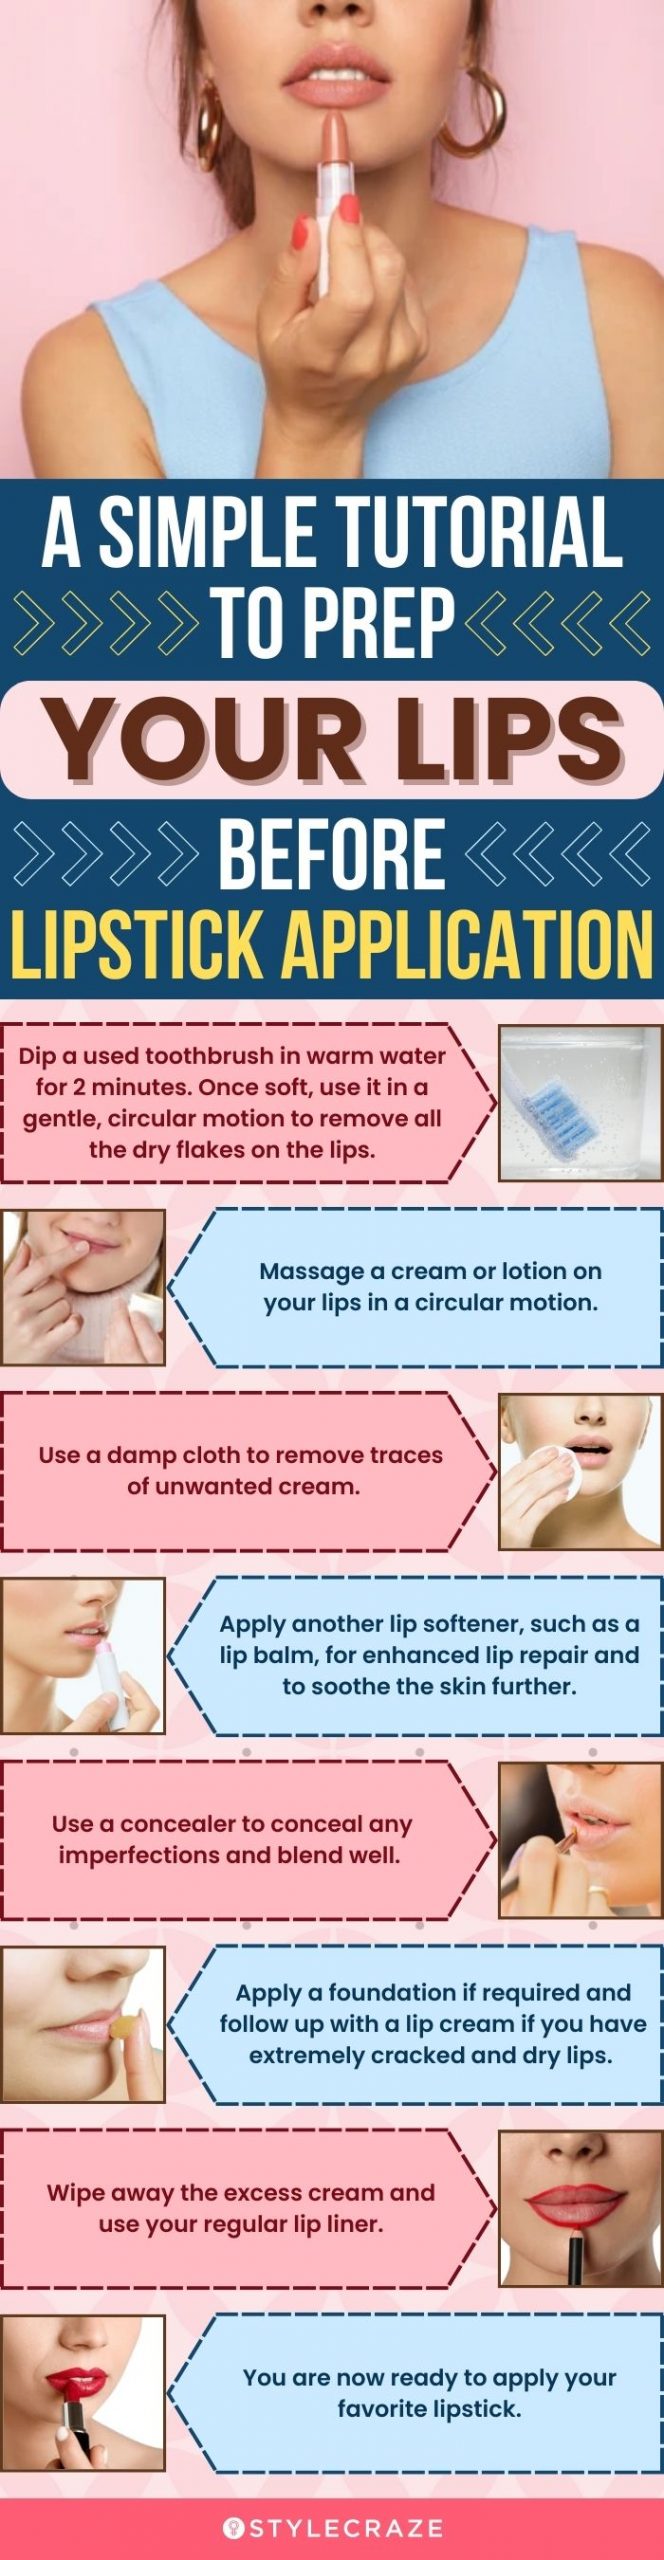 a simple tutorial to prep your lips before lipstick application (infographic)